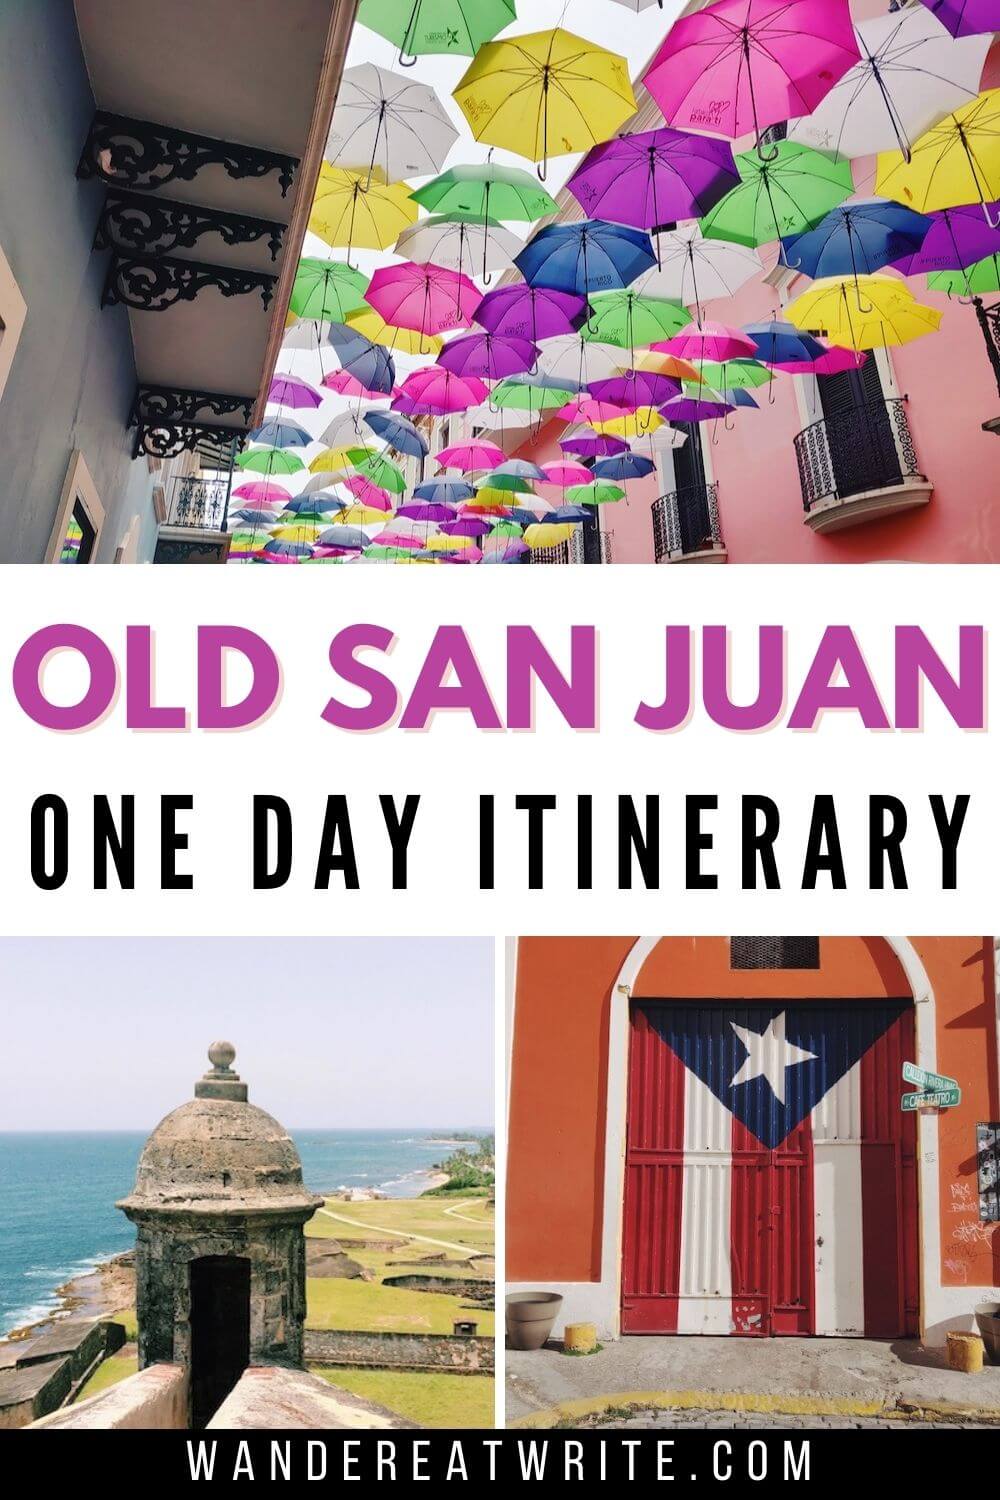 Text: Old San Juan walking tour one day itinerary; top photo: colorful umbrellas hanging over street; bottom left photo: sentry box in fortress with ocean in the background; bottom right photo: mural of Puerto Rican flag on side of orange building